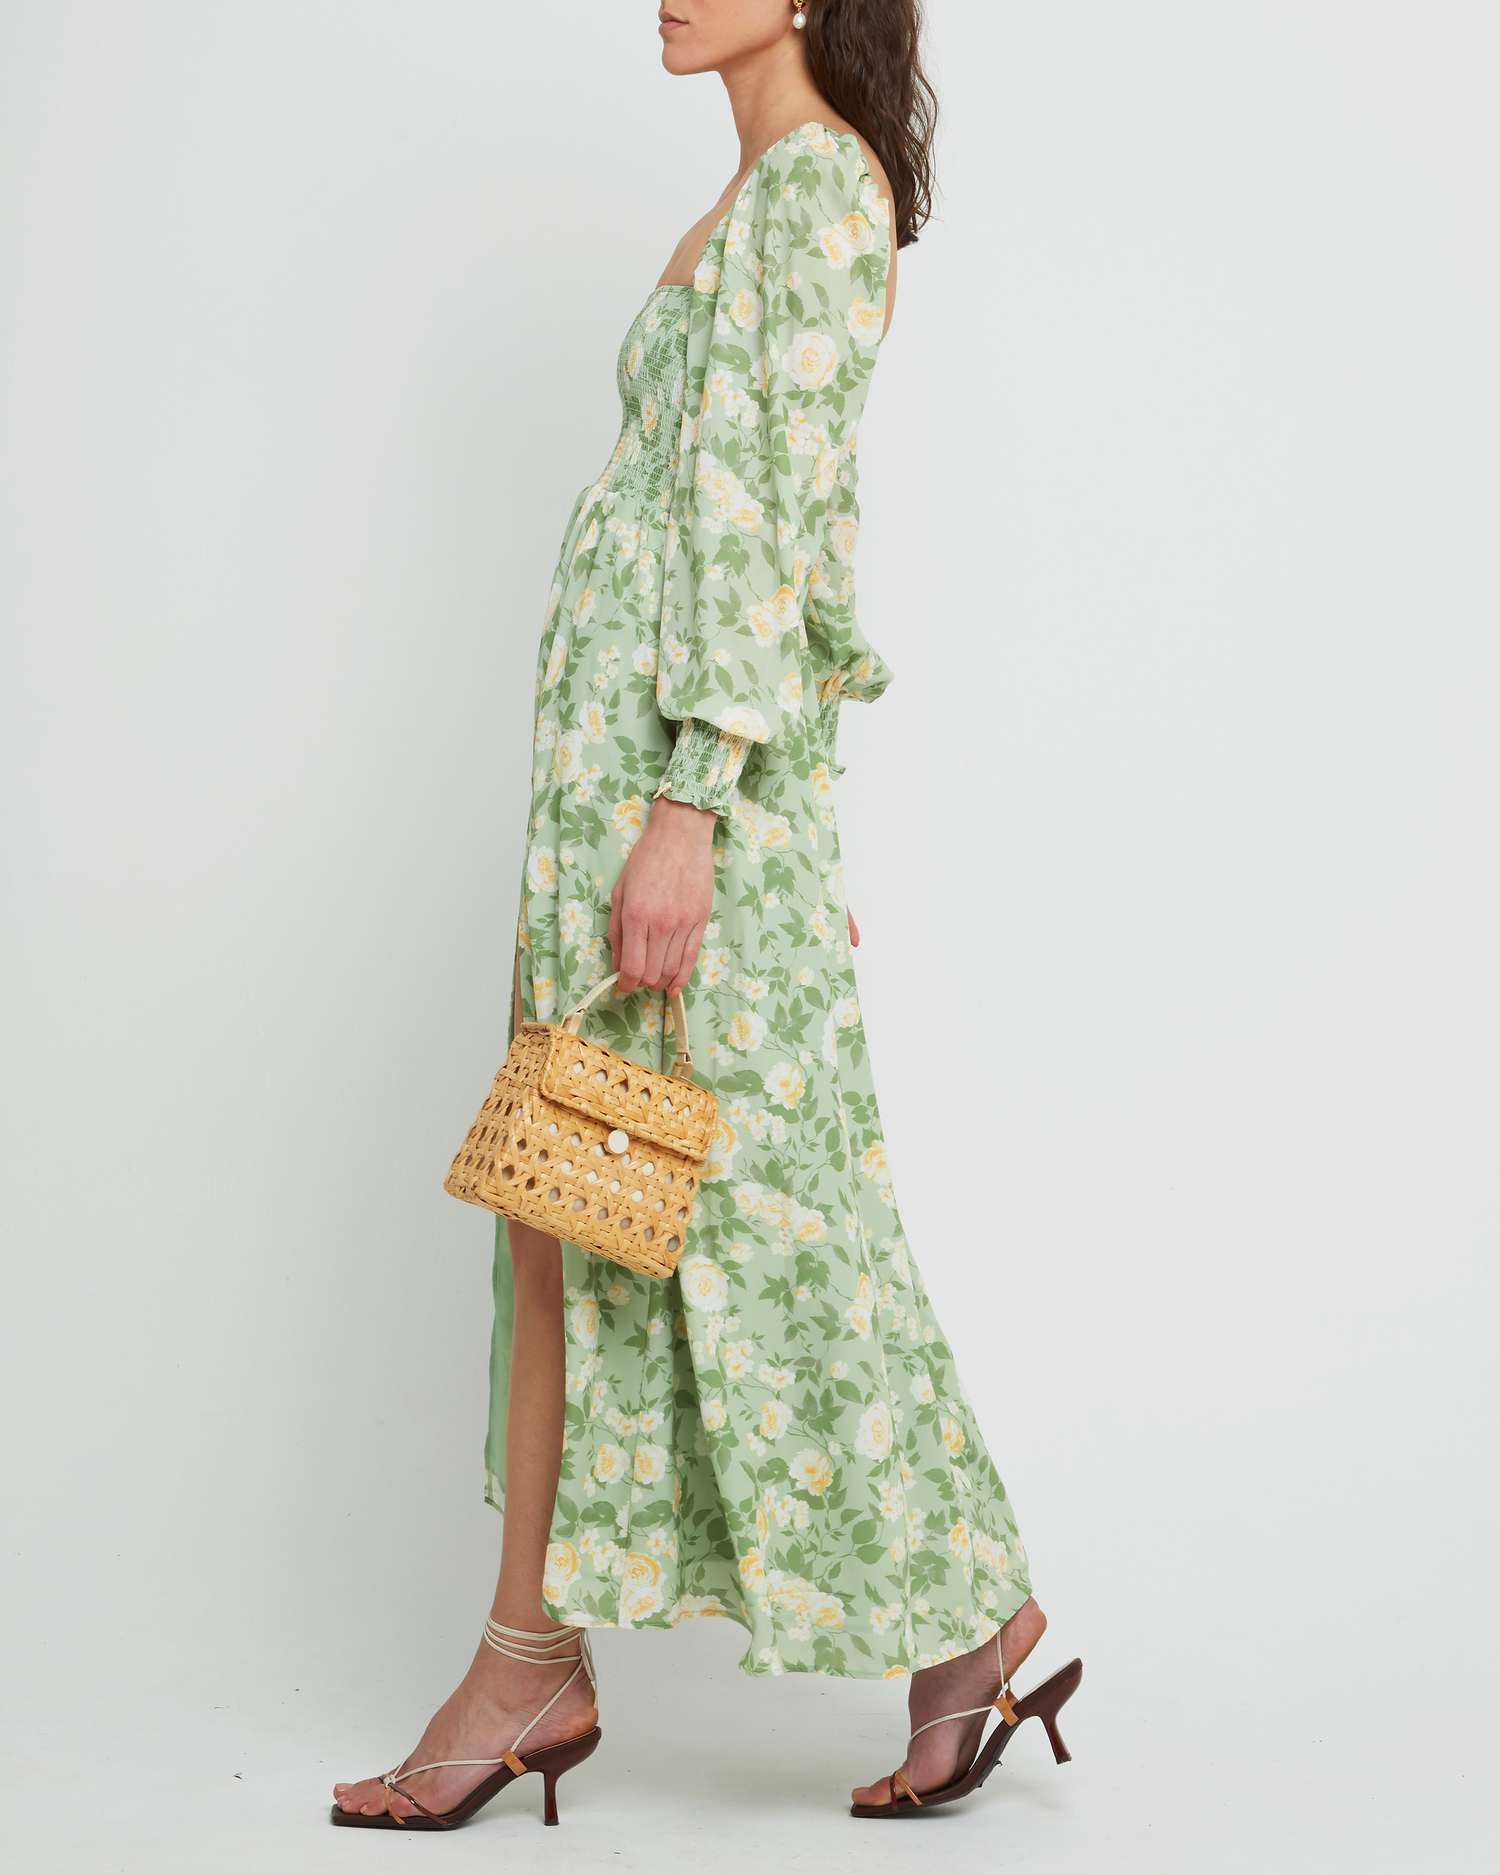 Third image of Classic Smocked Maxi Dress, a floral maxi dress, side slit, long, sheer sleeves, puff sleeves, square neckline, smocked bodice